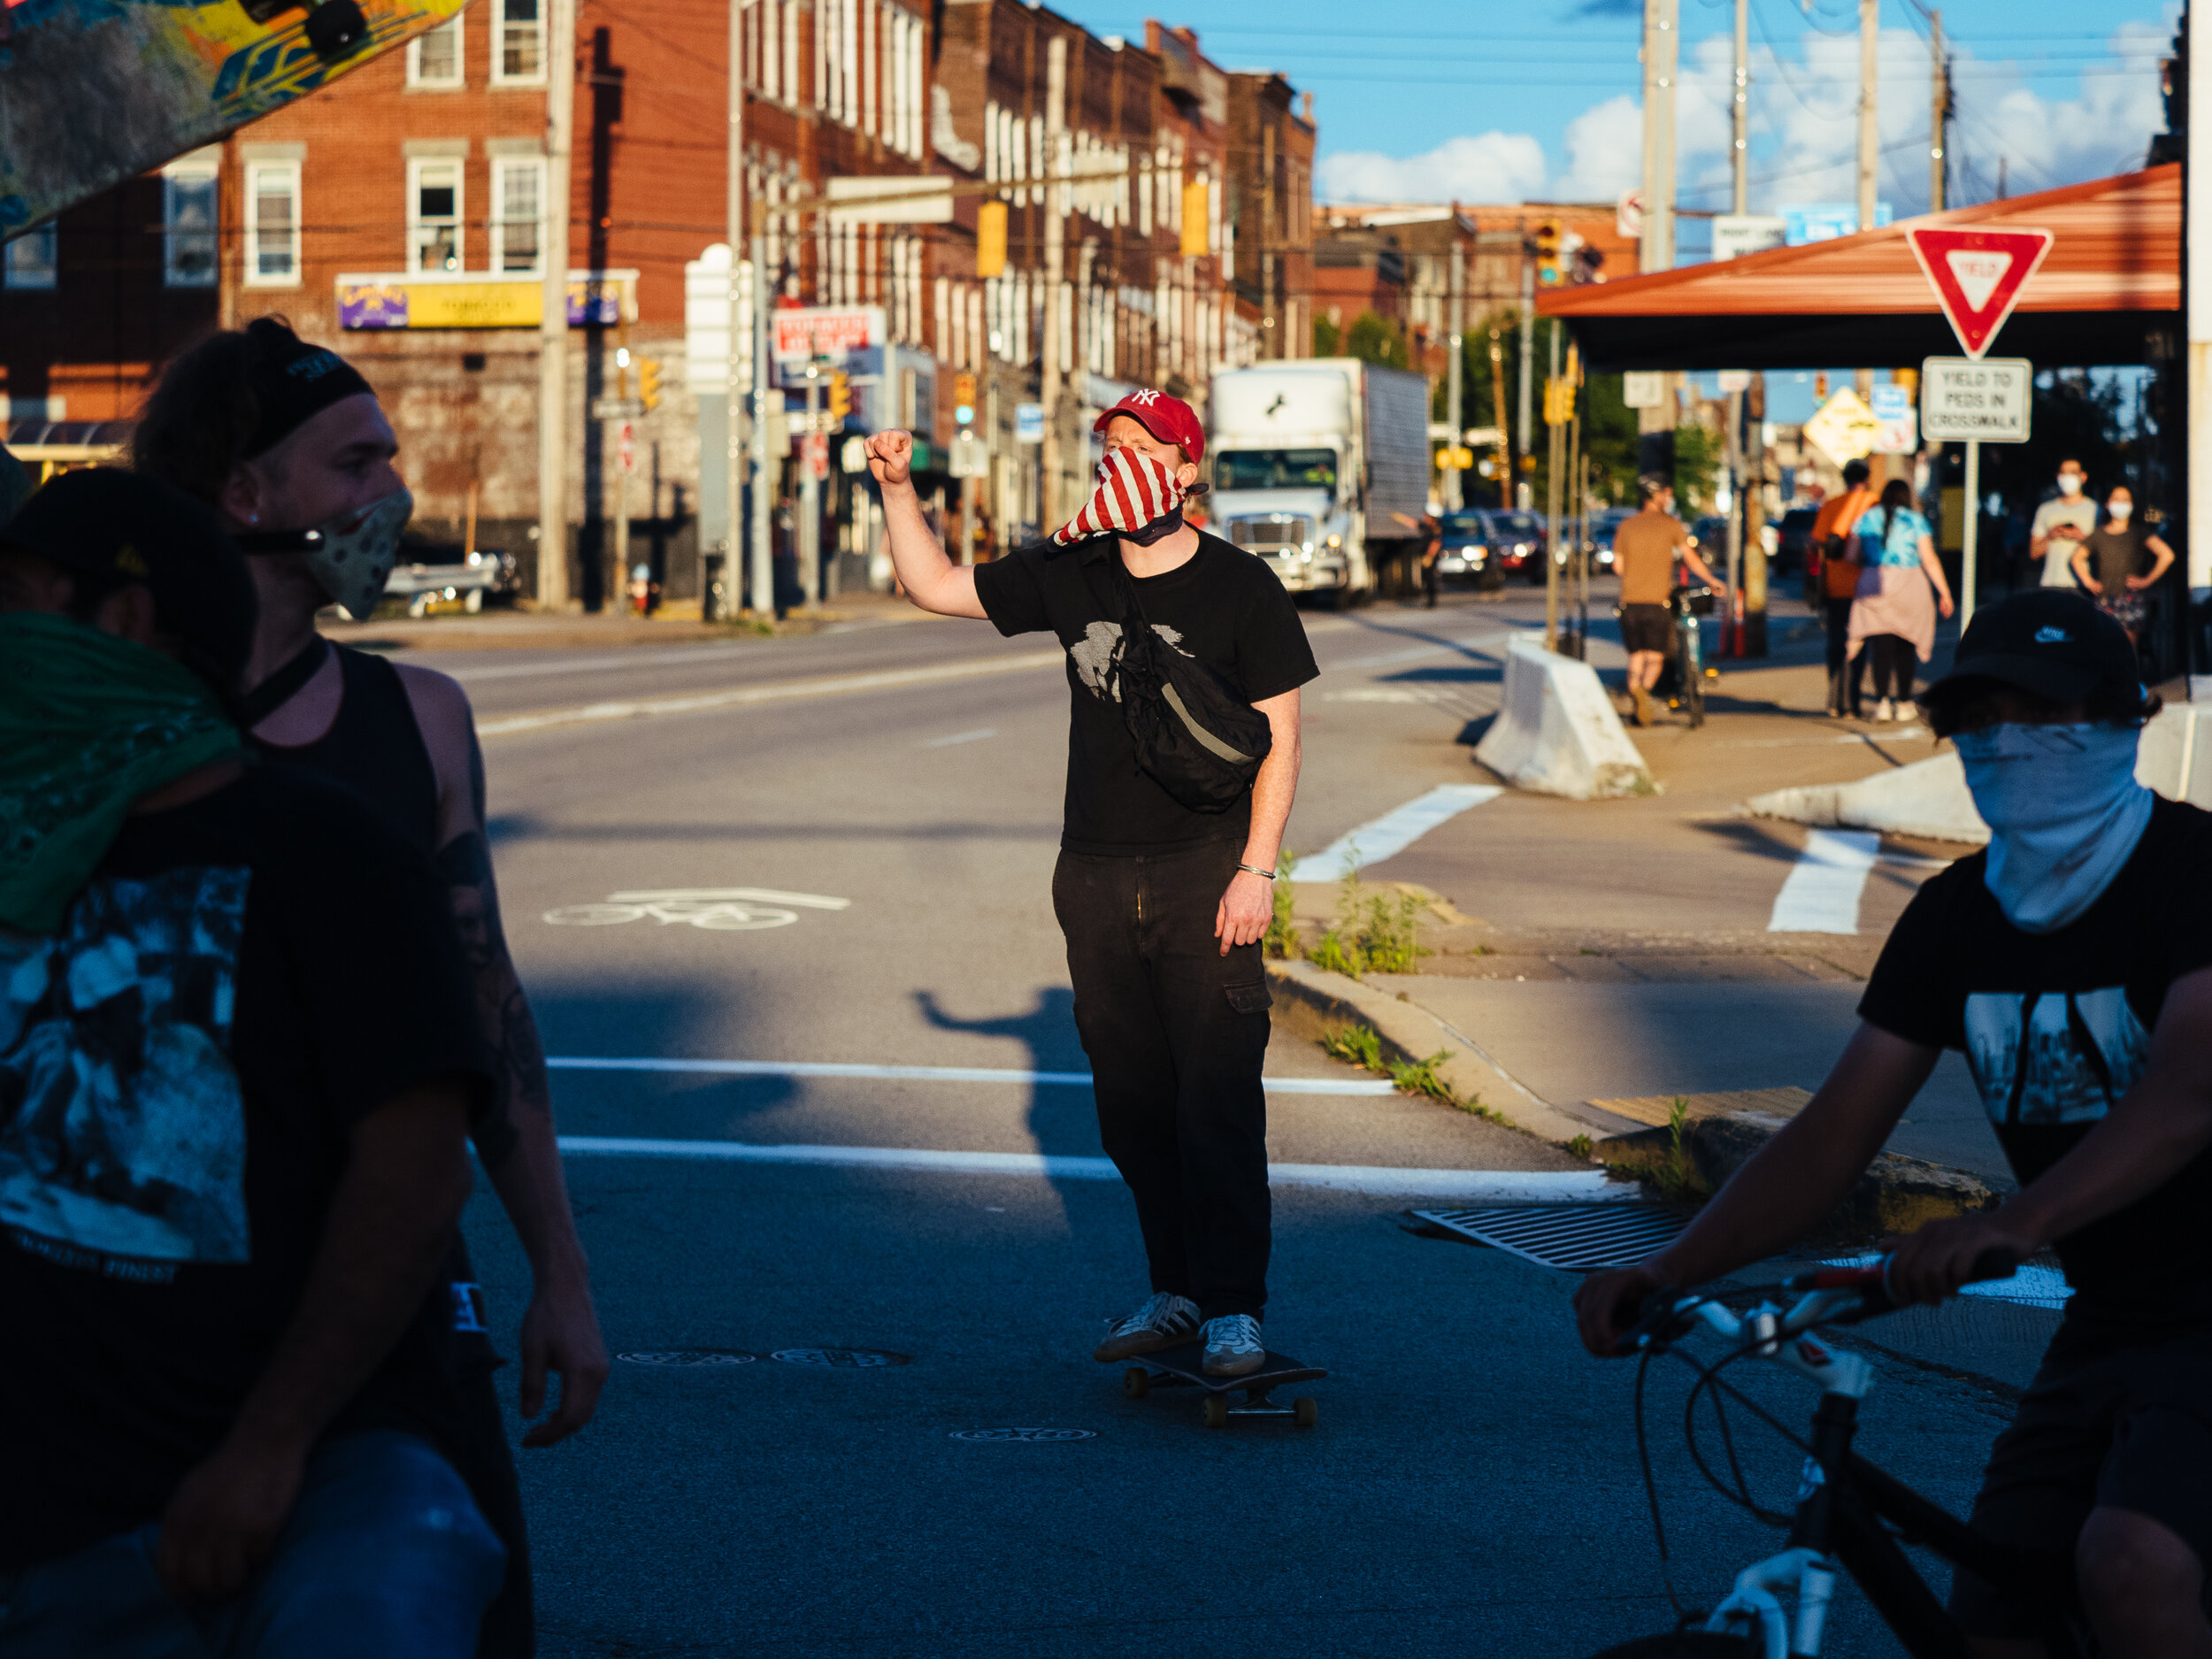  Skateboarders, bicyclists and others gathered for a “Roll For Floyd” protest that took protesters through Bloomfield, Downtown, Polish Hill, Lawrenceville and Garfield on Thursday, June 11, 2020.  